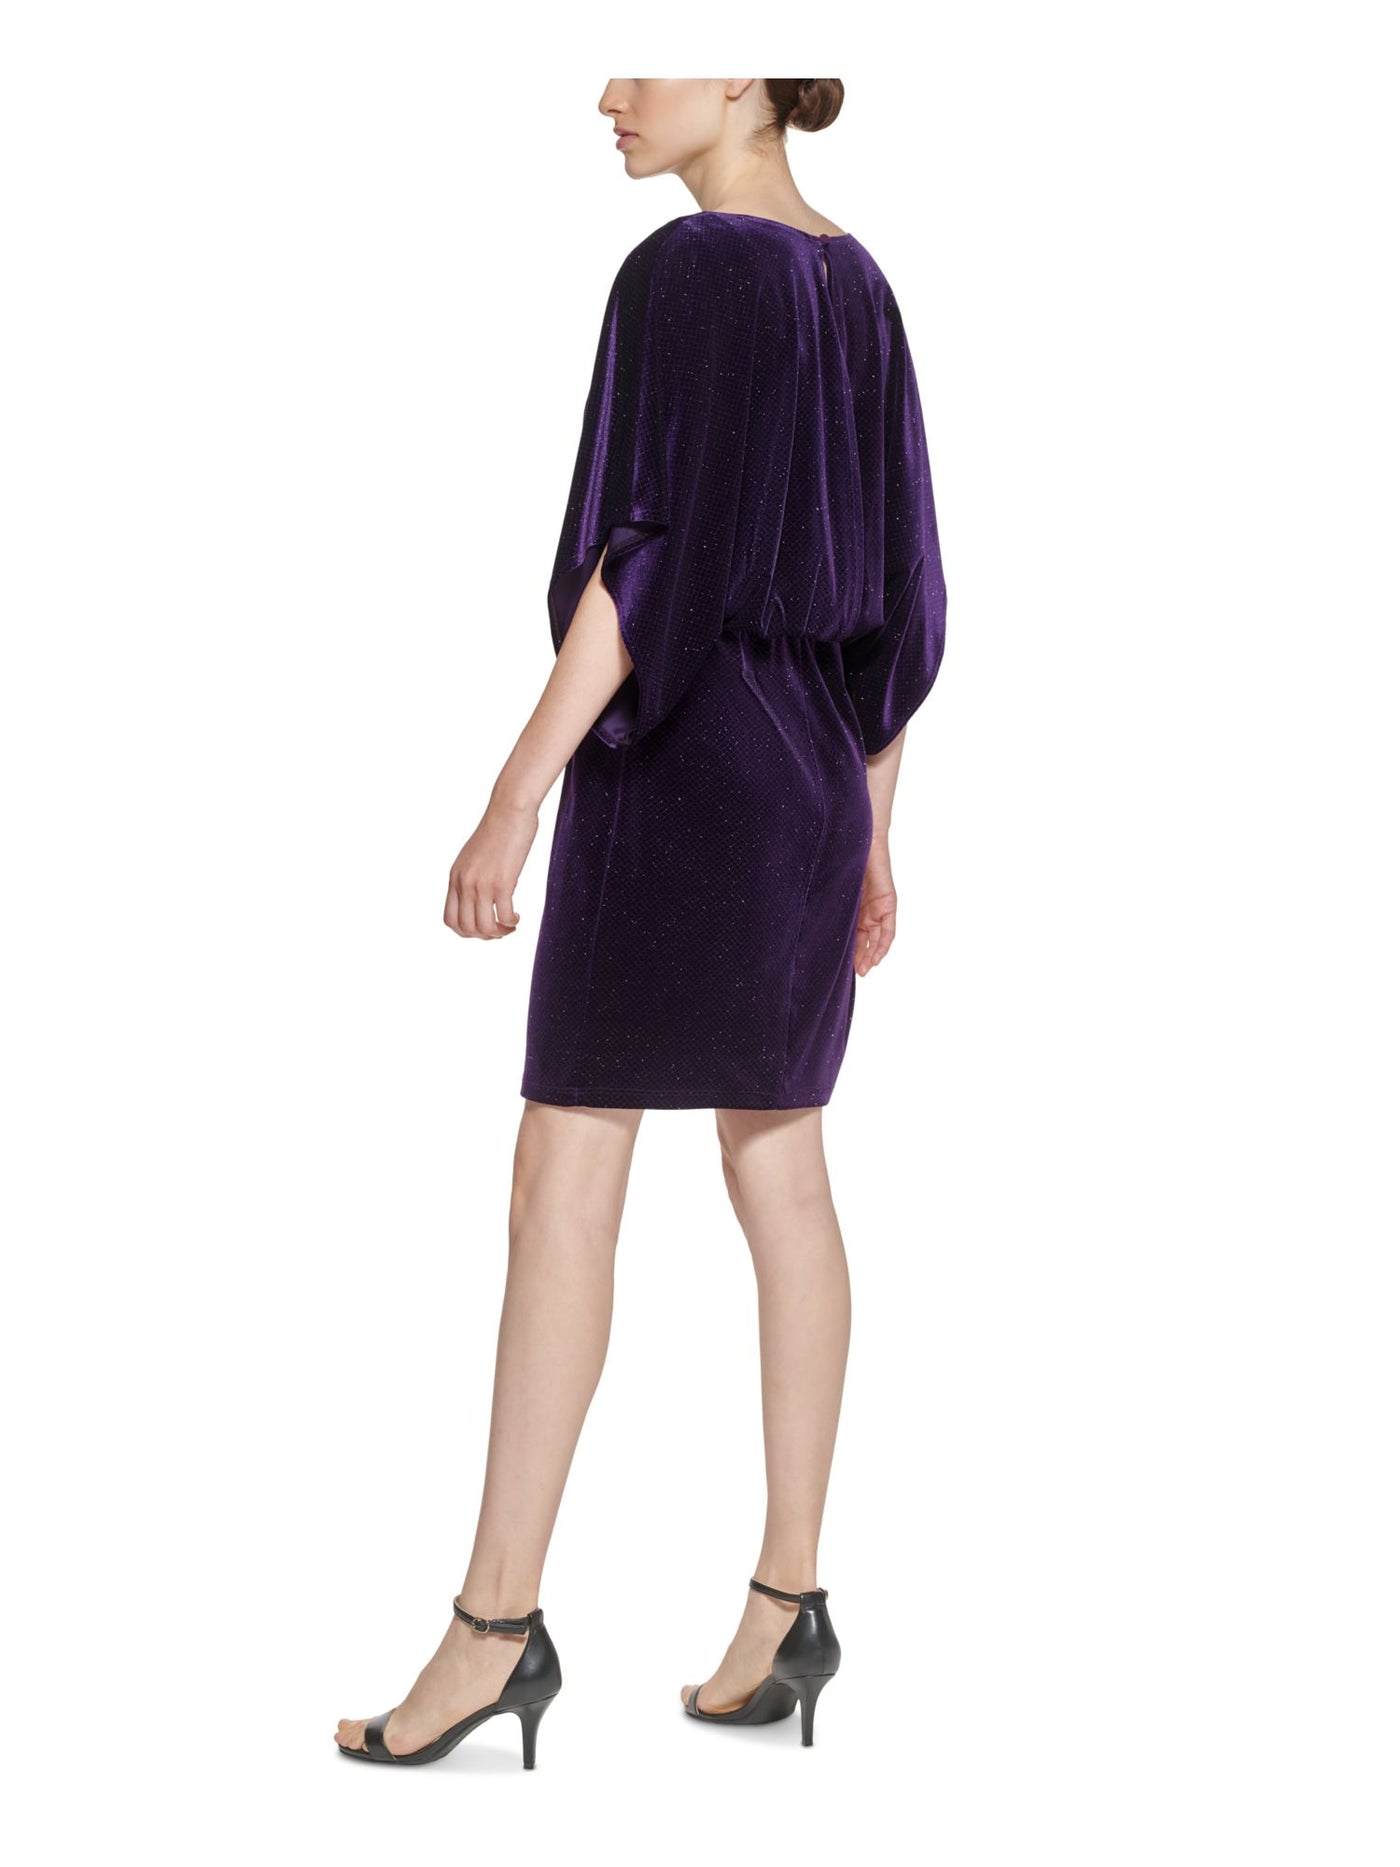 JESSICA HOWARD Womens Purple Stretch Metallic Cut Out Velvet Printed Dolman Sleeve Boat Neck Above The Knee Cocktail Blouson Dress 12